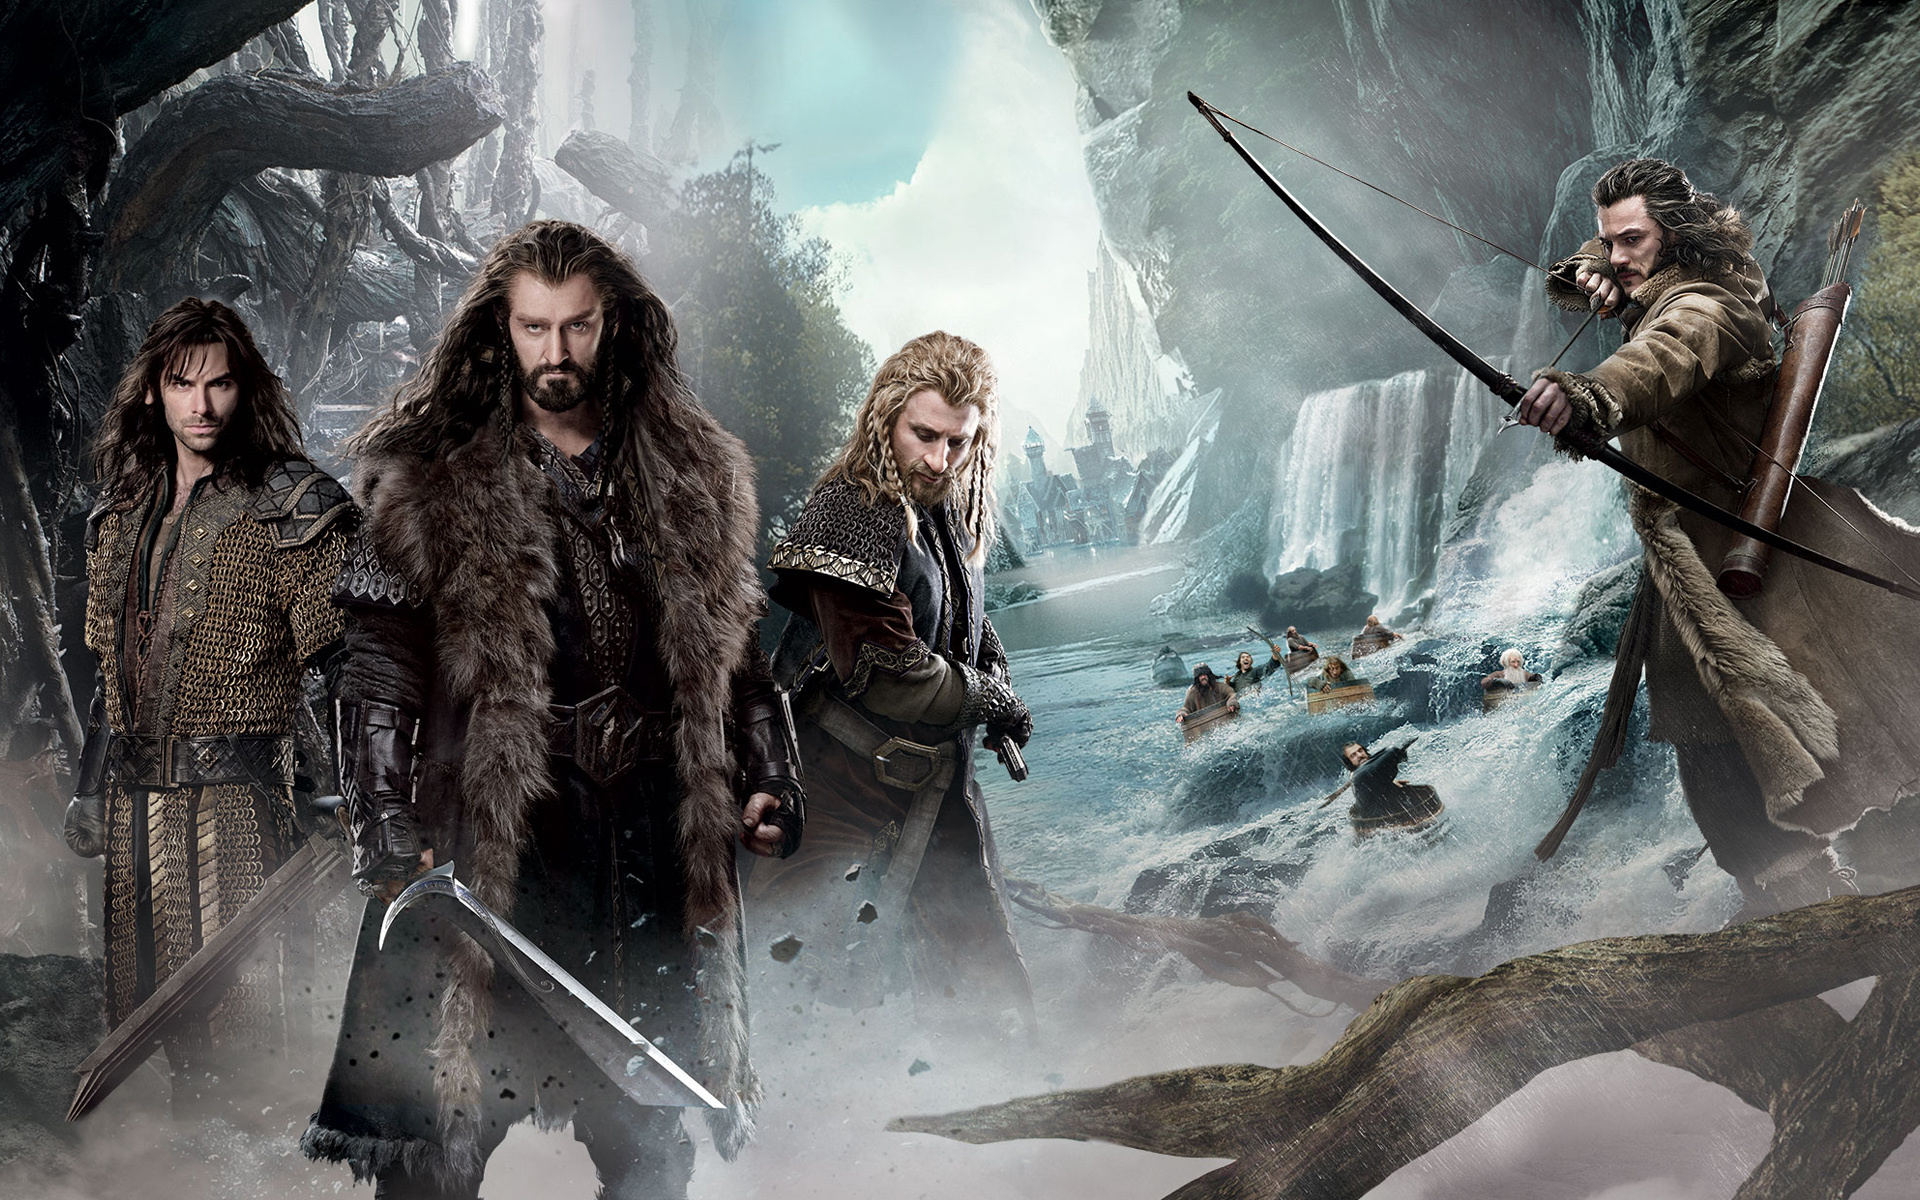 Dwarves (The Lord of the Rings): Thorin Oakenshield, Kíli, Fíli, Bard the Bowman, The Hobbit. 1920x1200 HD Background.